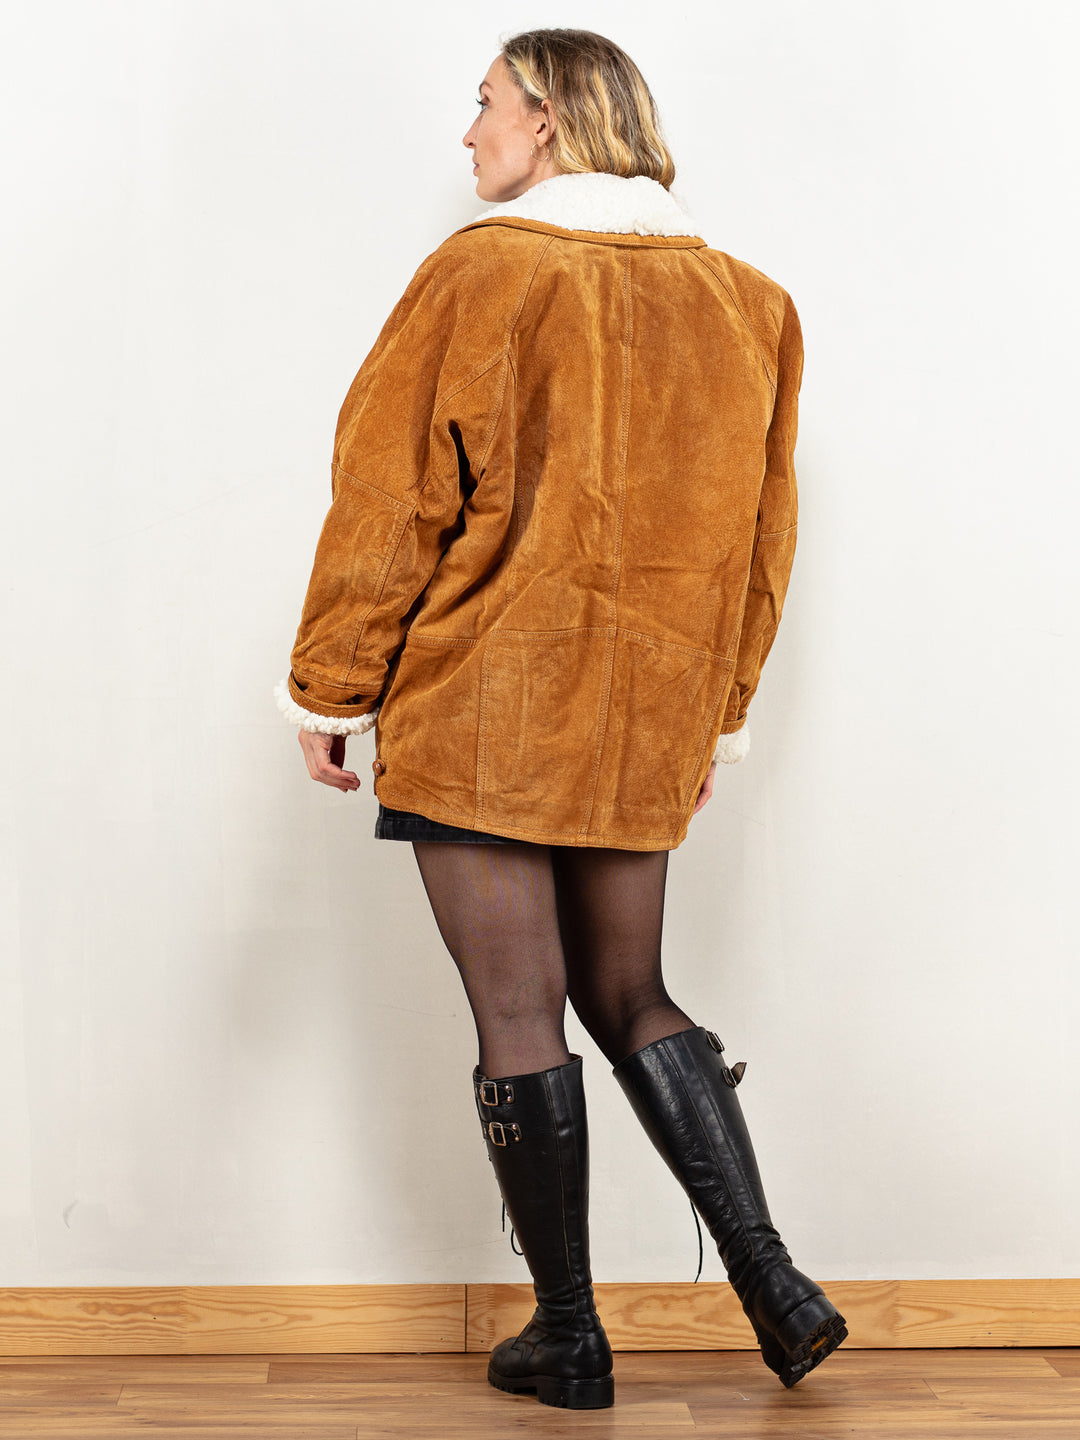 Suede Sherpa Coat vintage brown oversized insulated suede leather half coat faux shearling lined suede winter coat size extra extra large